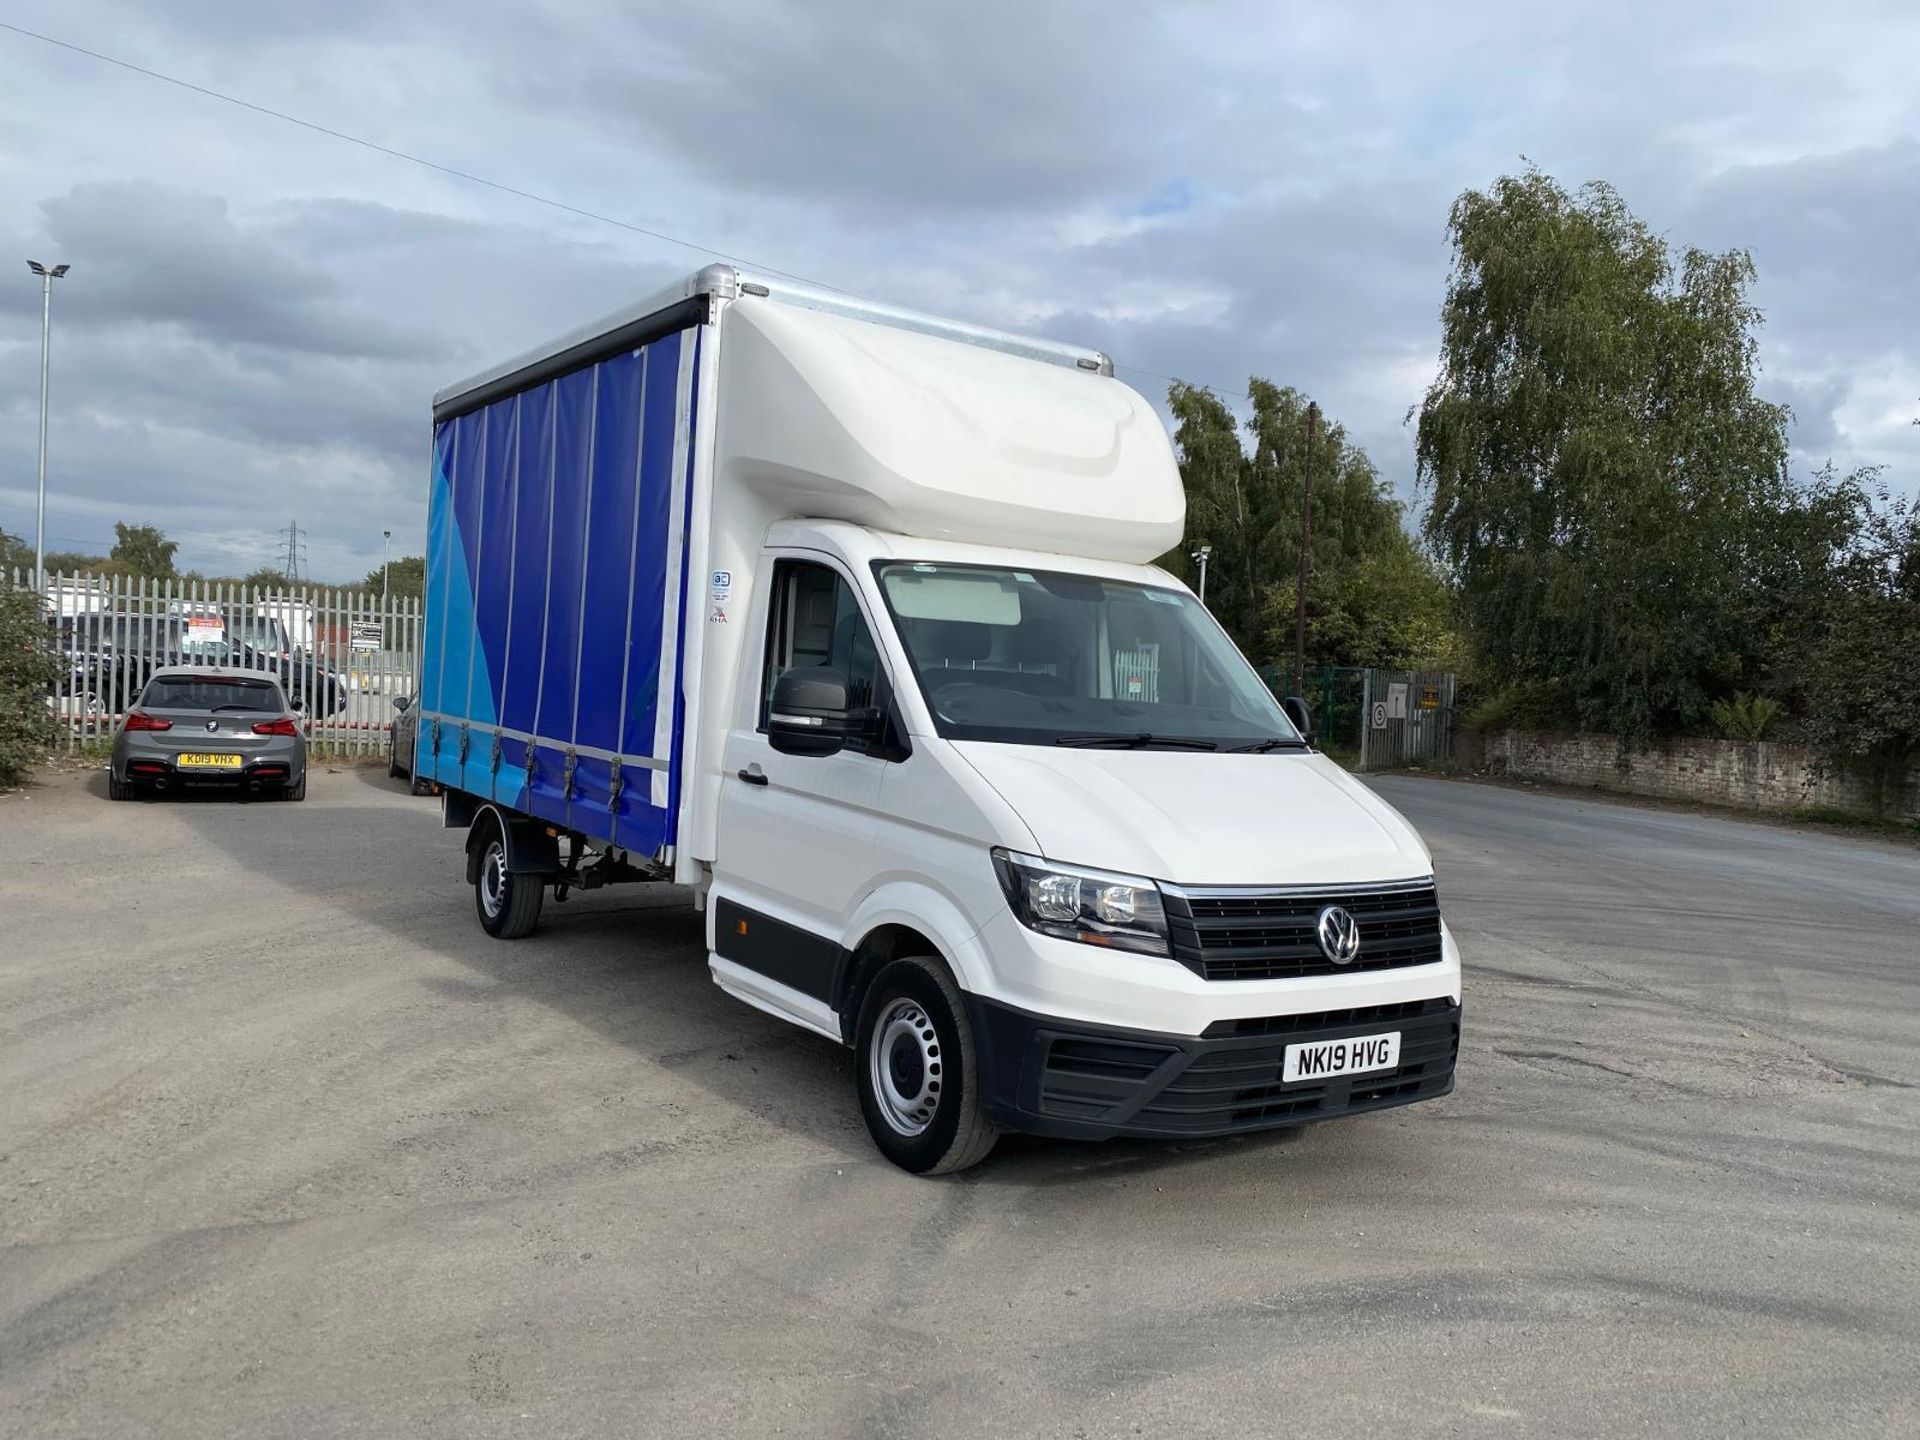 2019 VW CRAFTER 14FT CURTAIN SIDER: RELIABLE WORKHORSE - Image 5 of 12